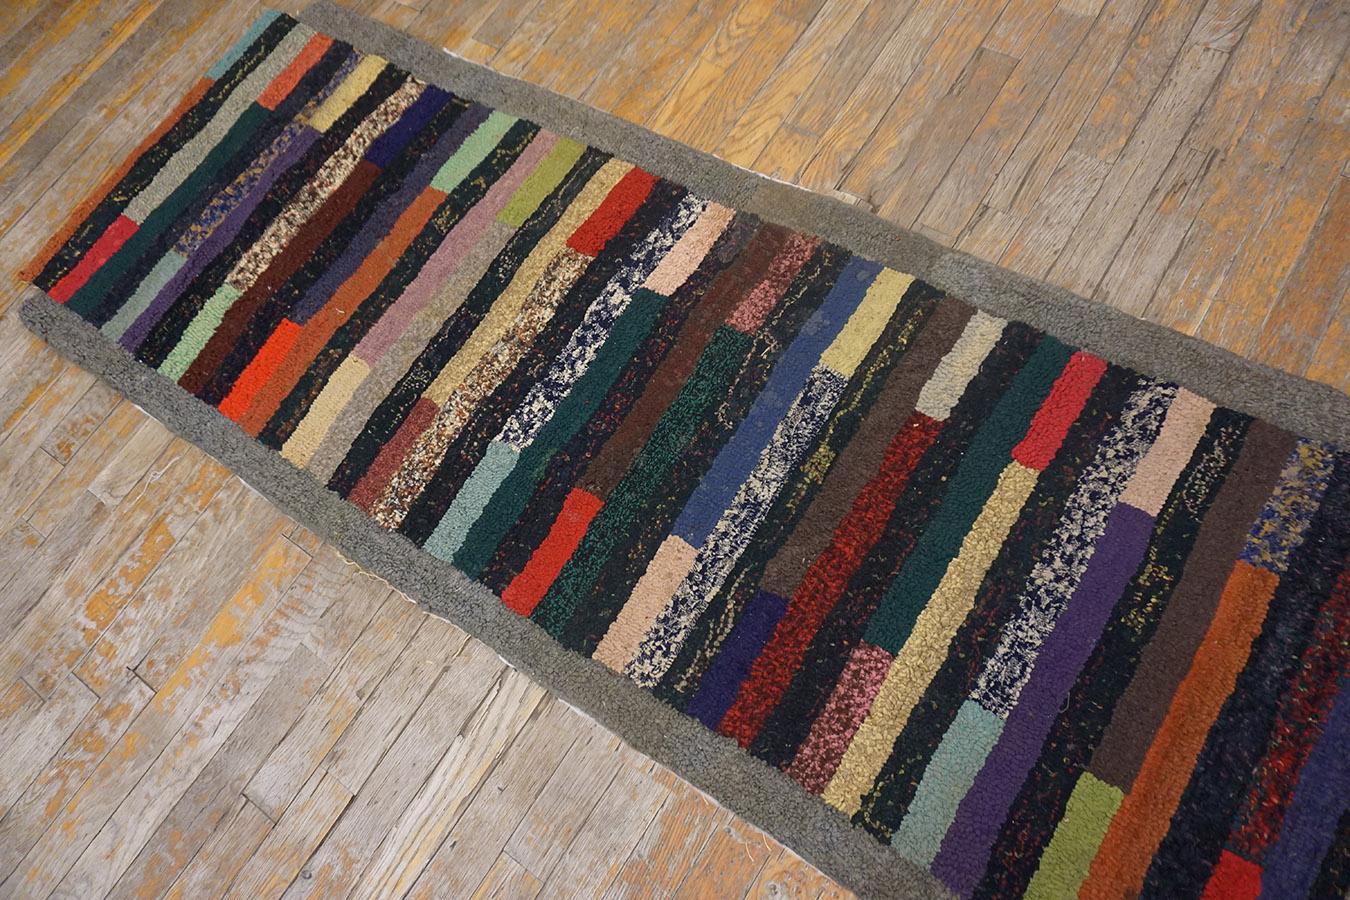 Antique American hooked Rug, Size: 2' 3